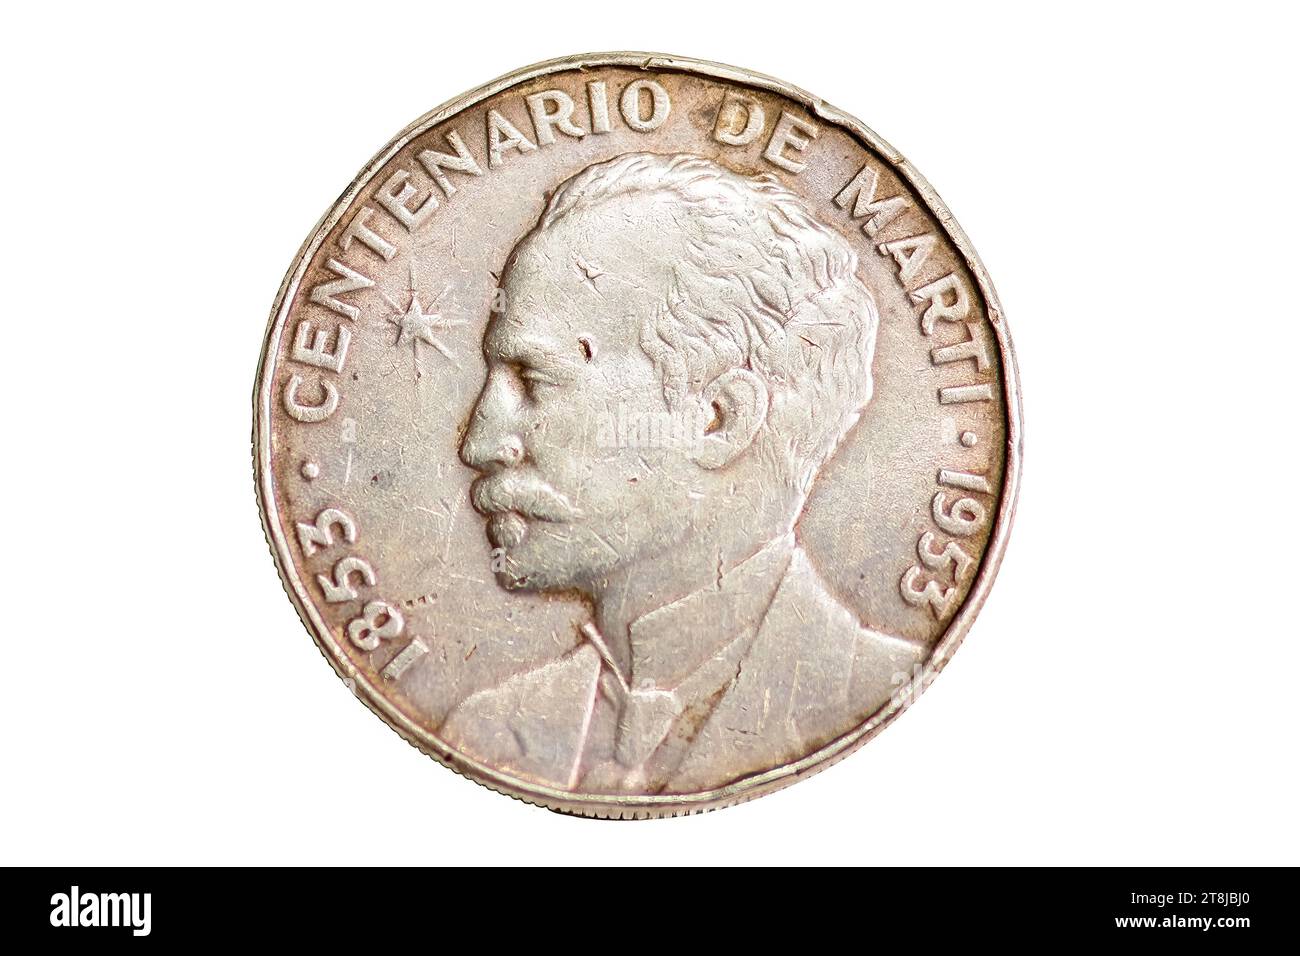 Vintage Cuban Currency. Old Cuban silver coin or 'peso macho' Stock Photo